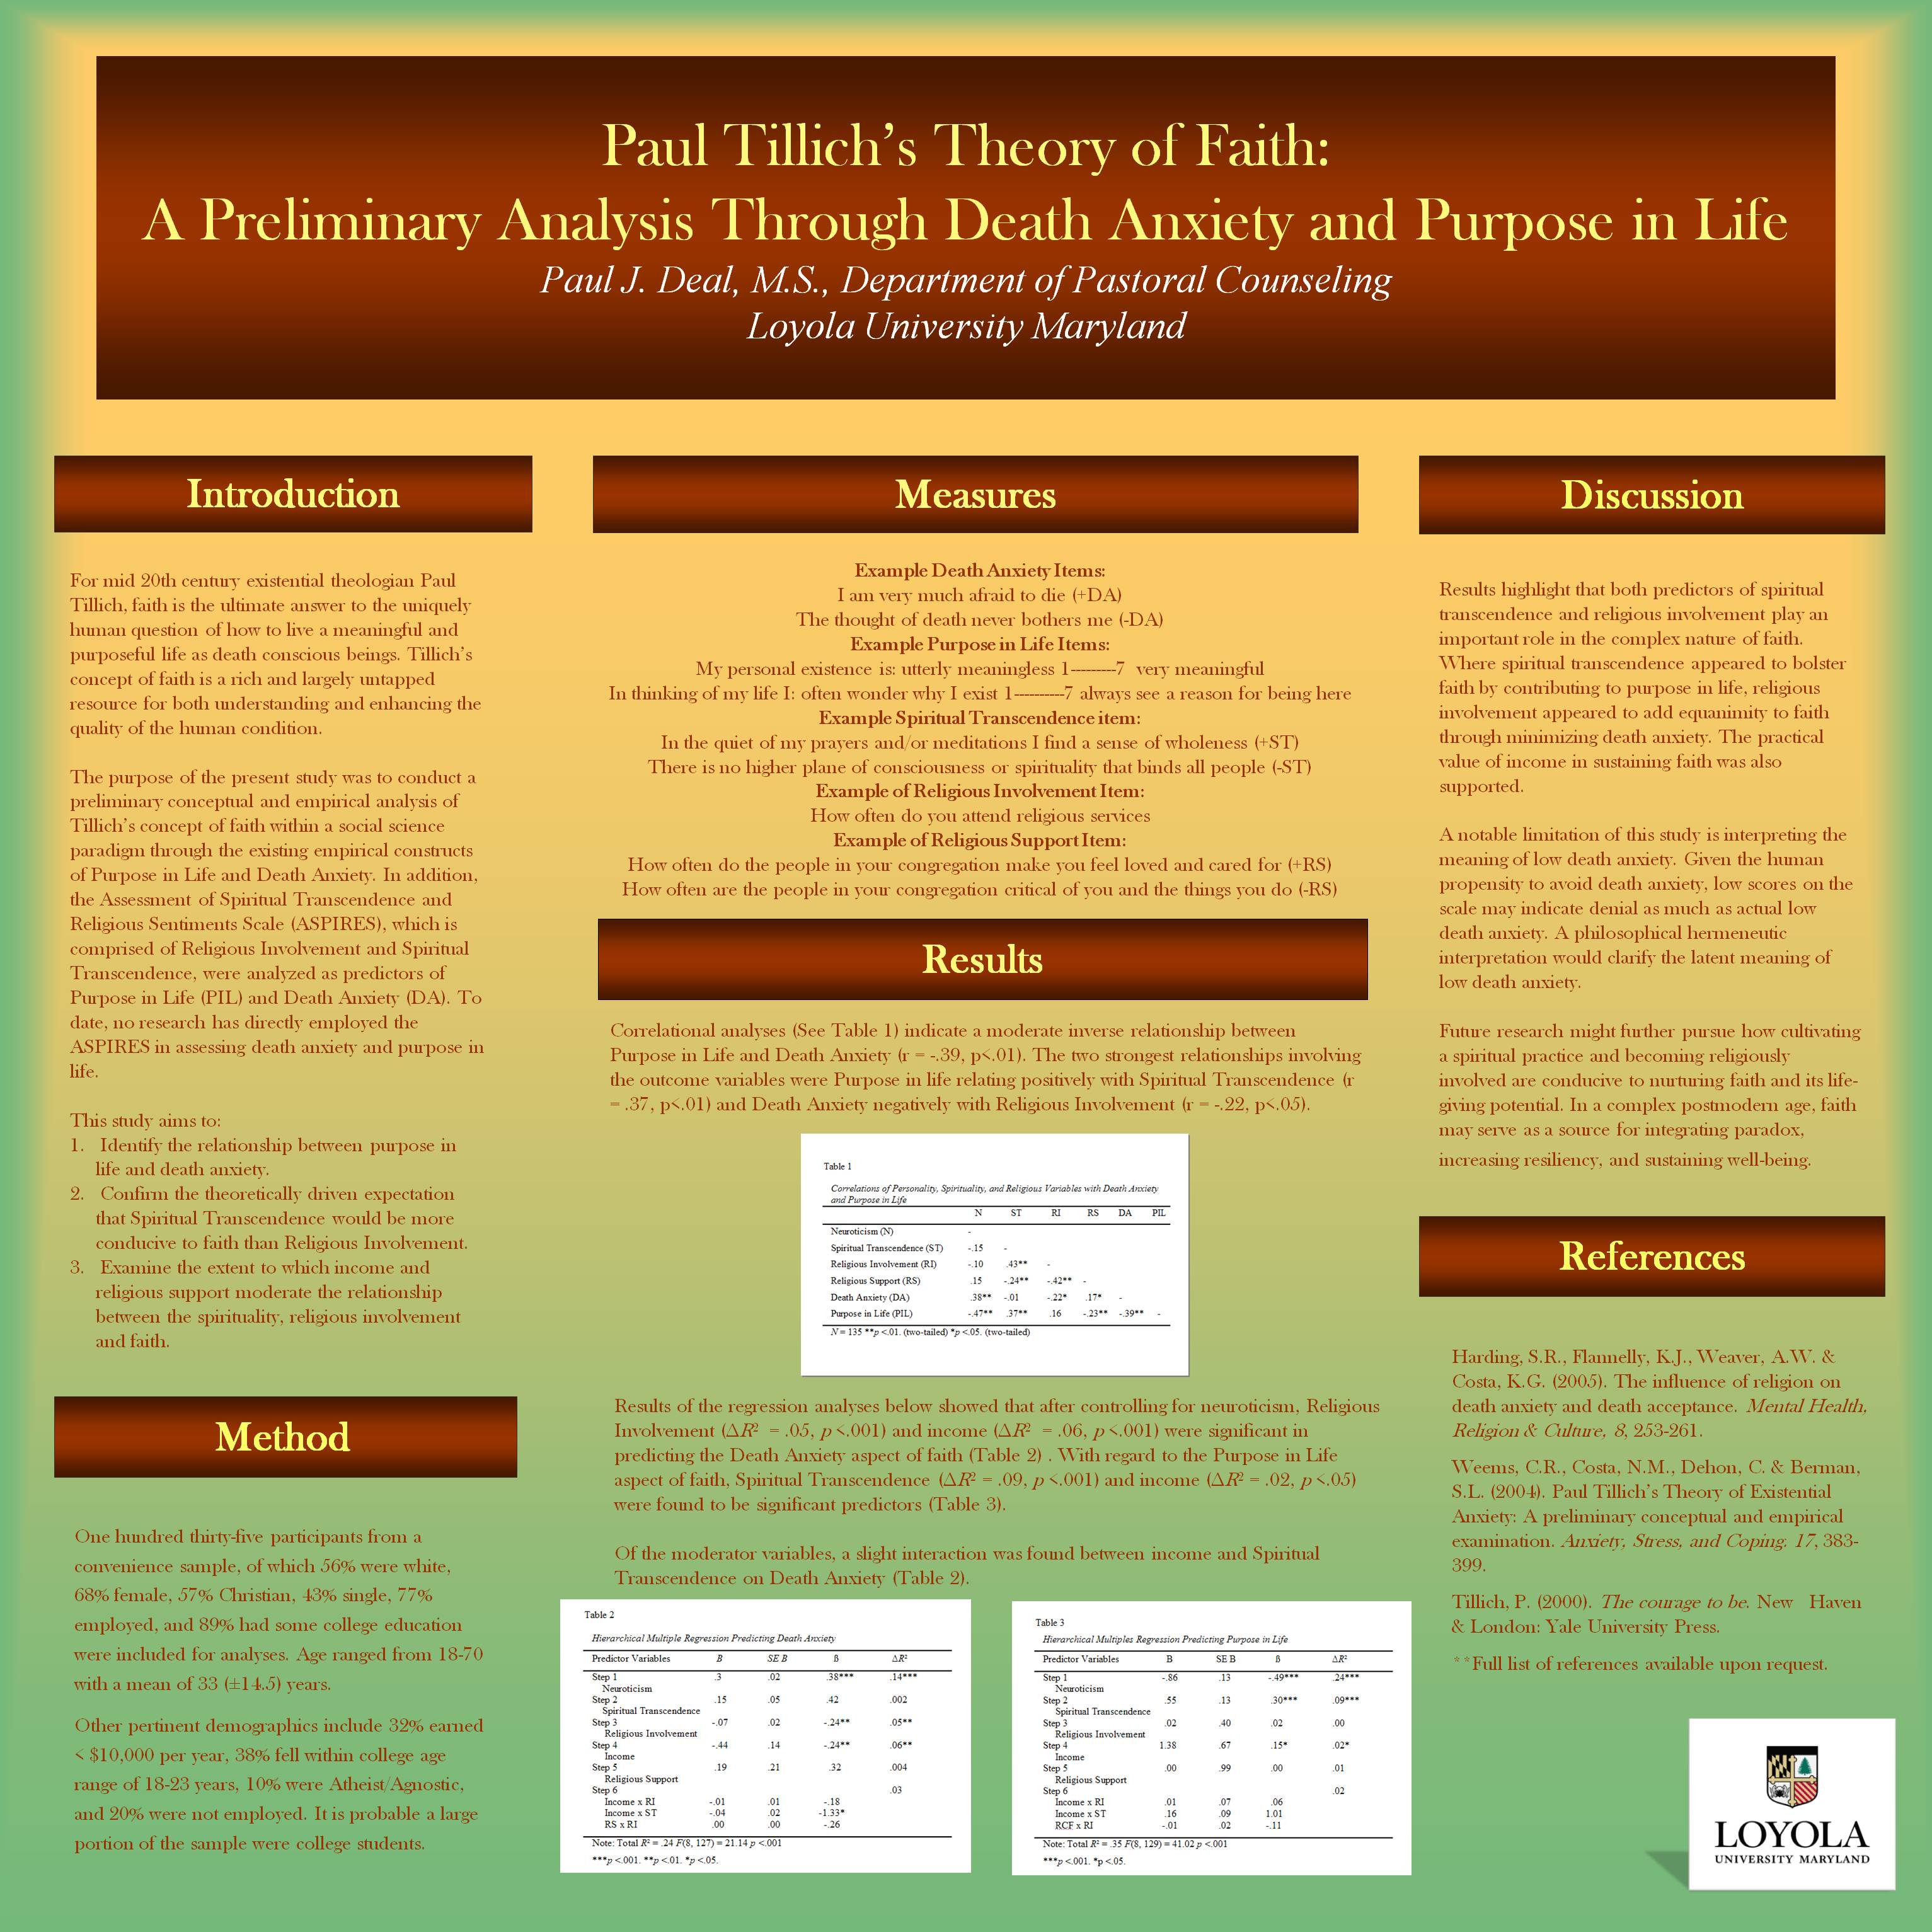 Poster image: Paul Tillich’s Theory of Faith:  A Preliminary Analysis Through Death Anxiety and Purpose in Life